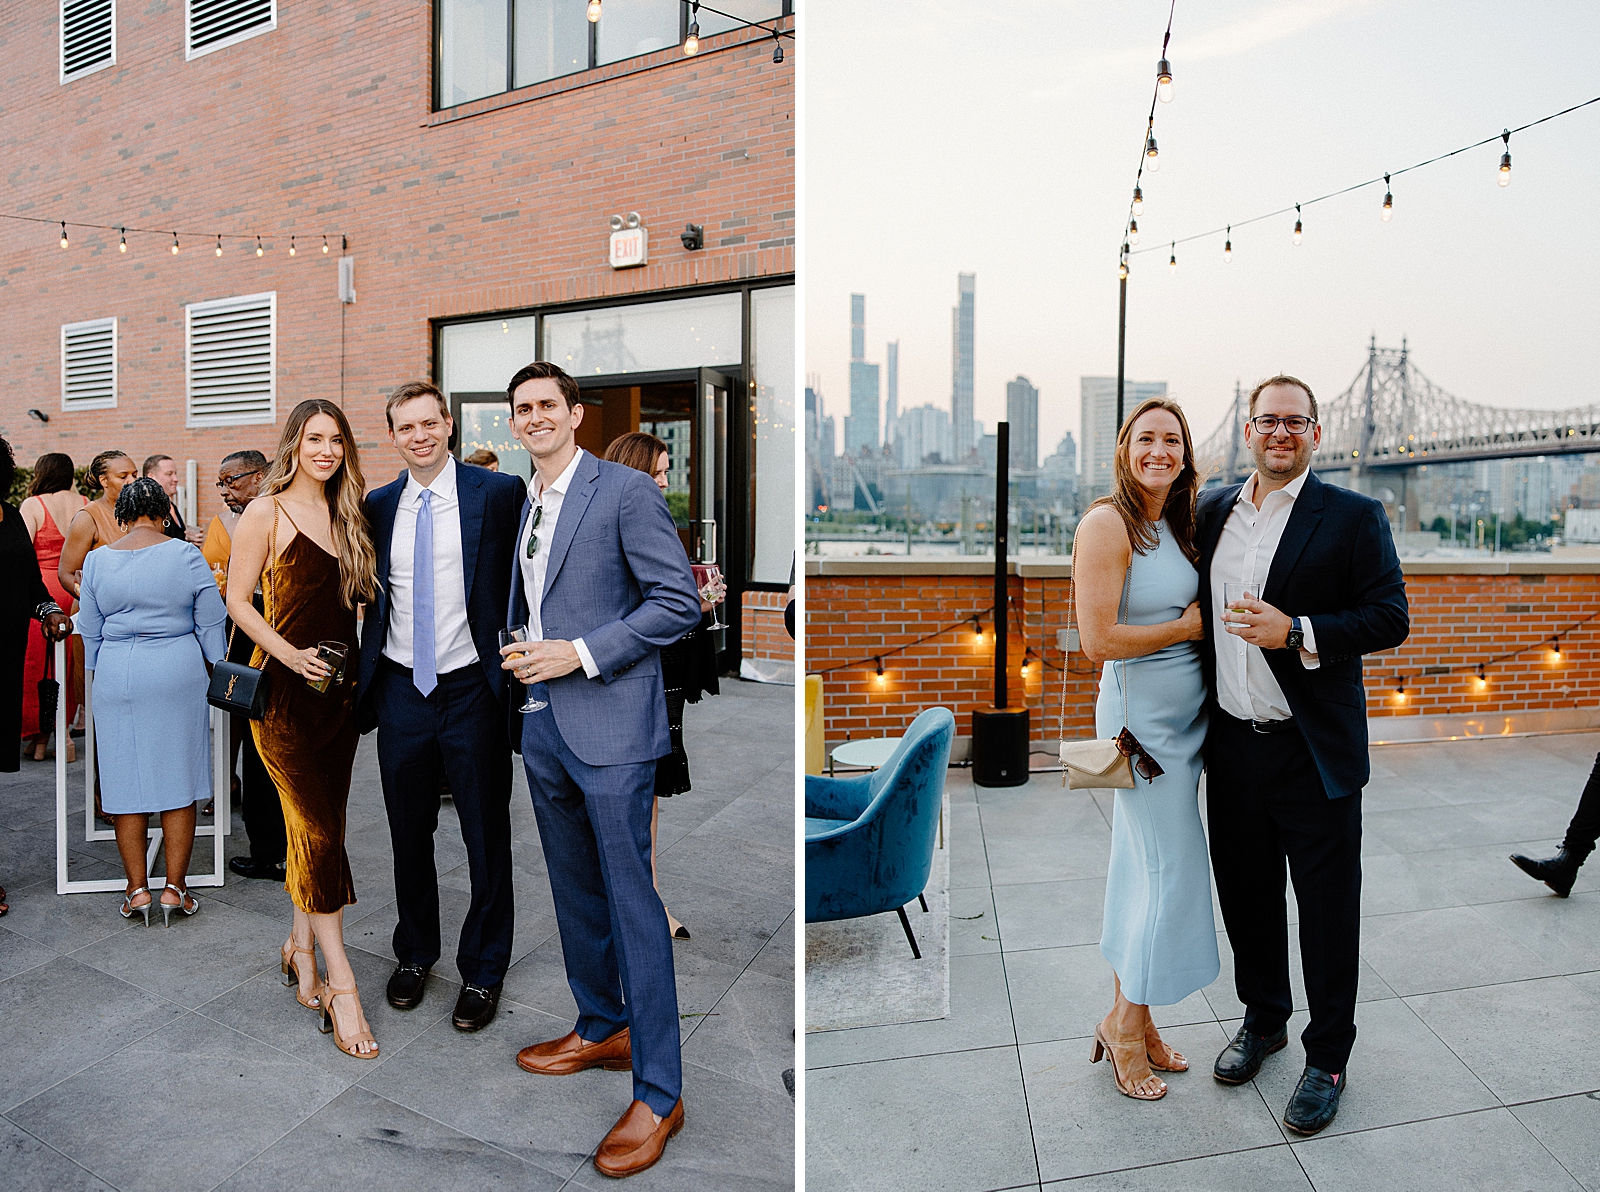 Portraits of wedding guests at outdoor Chic LIC cocktail hour